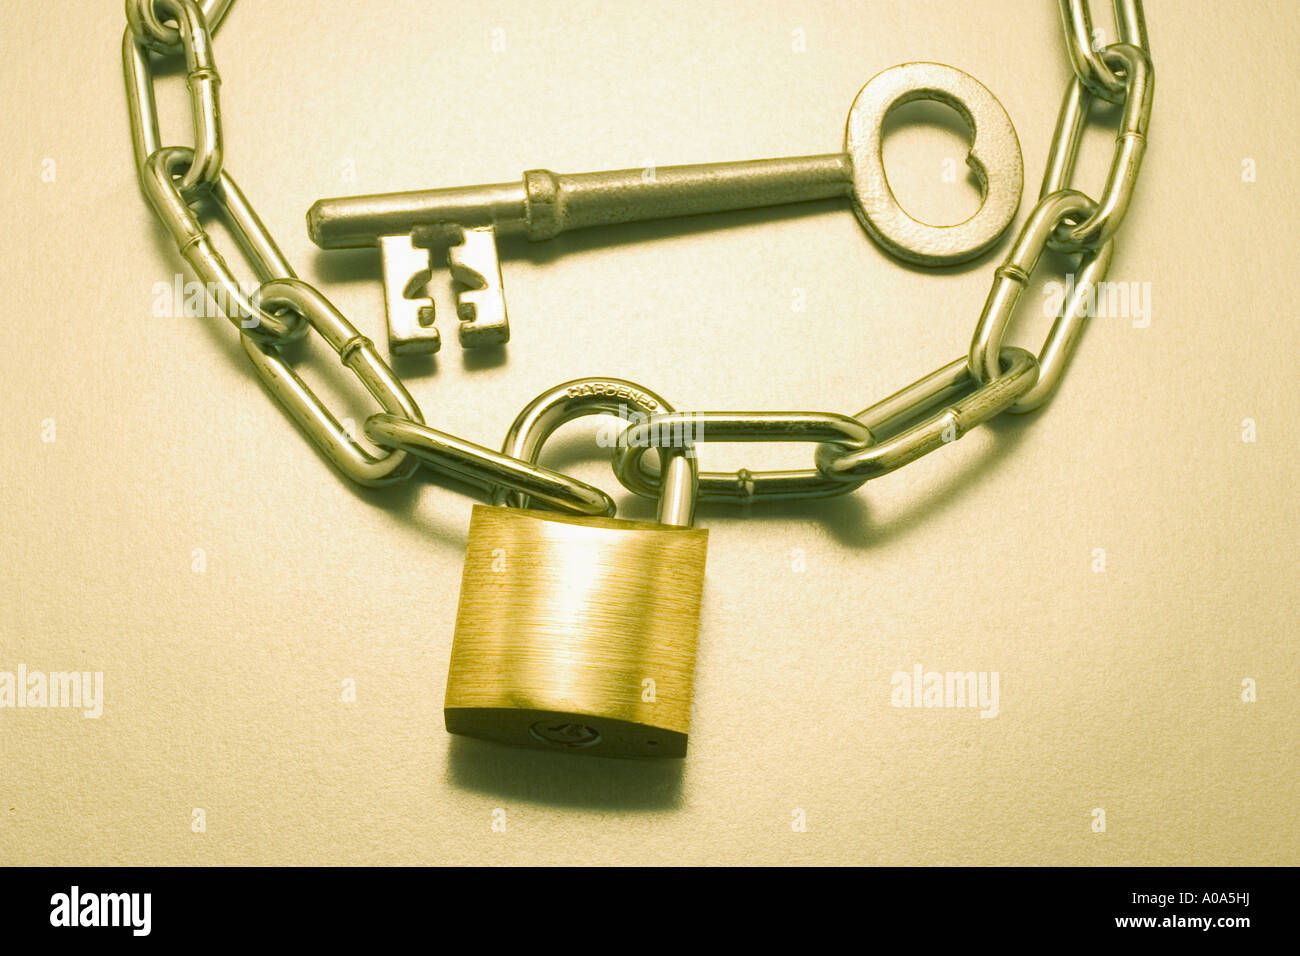 Skeleton Key with Lock and Chain Stock Photo